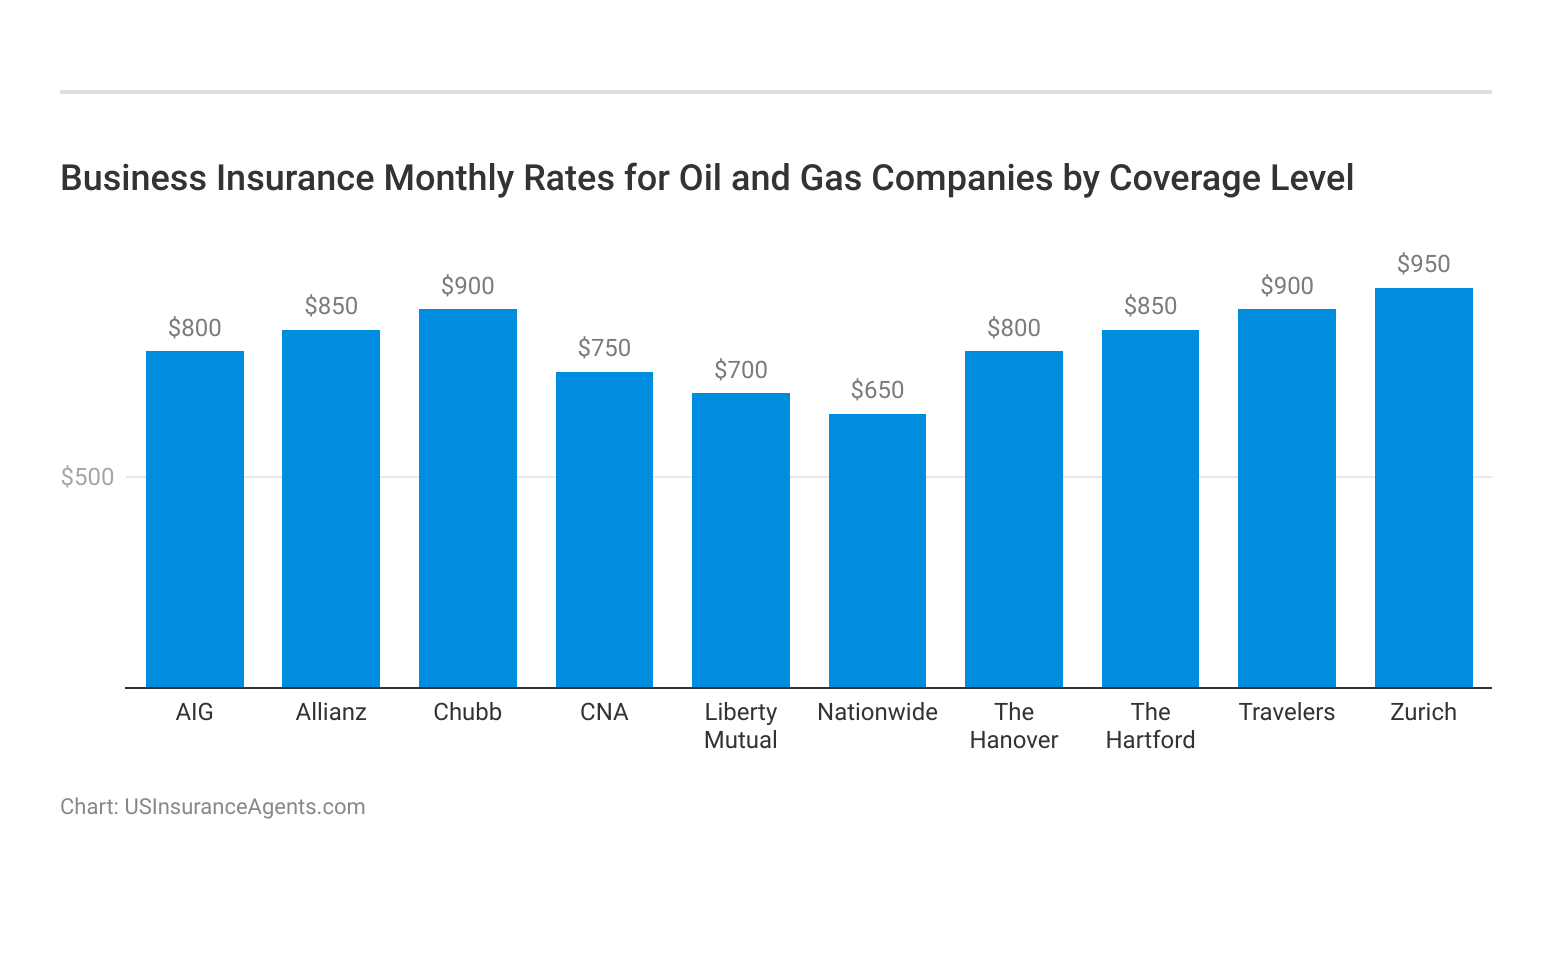 <h3>Business Insurance Monthly Rates for Oil and Gas Companies by Coverage Level</h3>